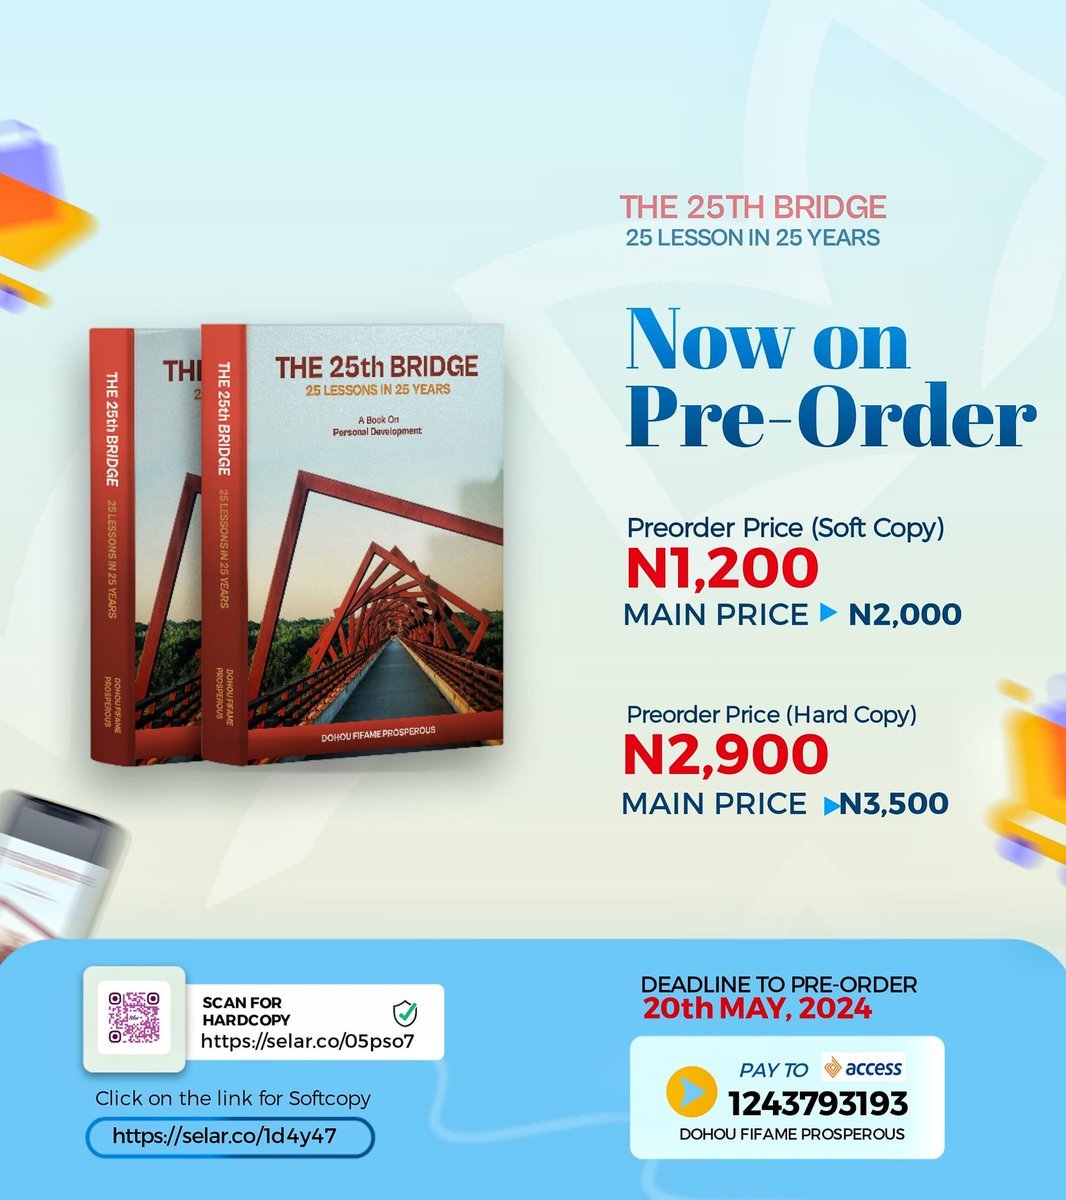 Guyz it's here.❤💃

Pre-order THE 25th BRIDGE now at discounted price.

Soft copy:1200(selar.co/1d4y47)
Hard copy:2900(selar.co/05pso7
#growth 
#personaldevelopment 
#personaldevelopmentbook